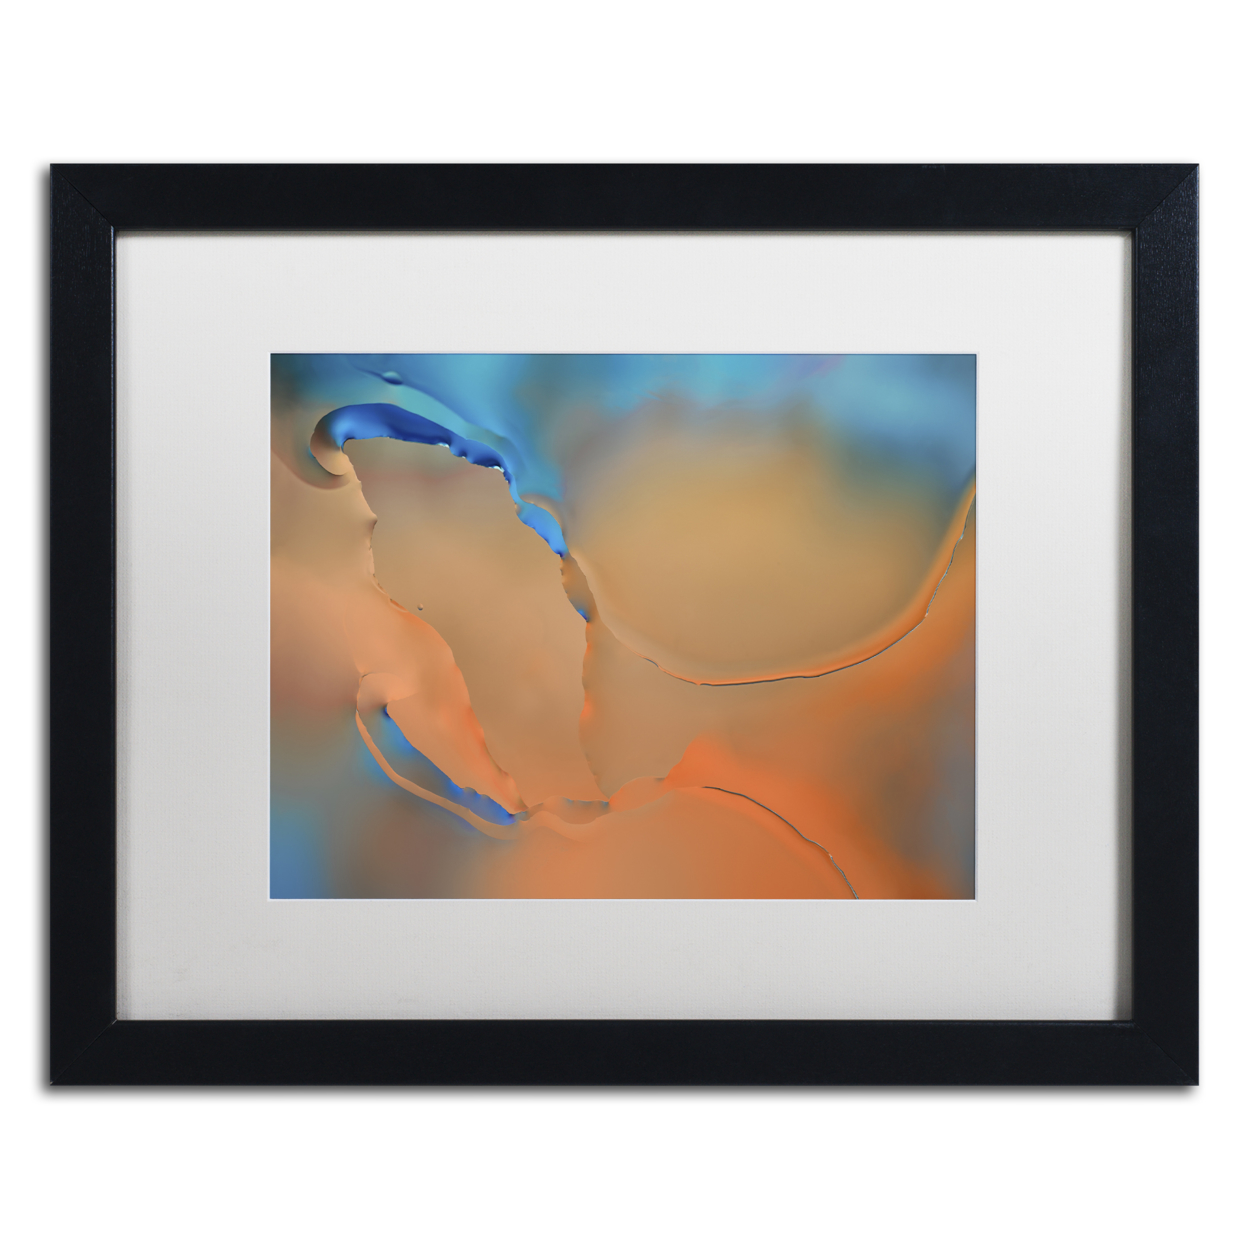 Cora Niele 'Blue And Orange Flow' Black Wooden Framed Art 18 X 22 Inches